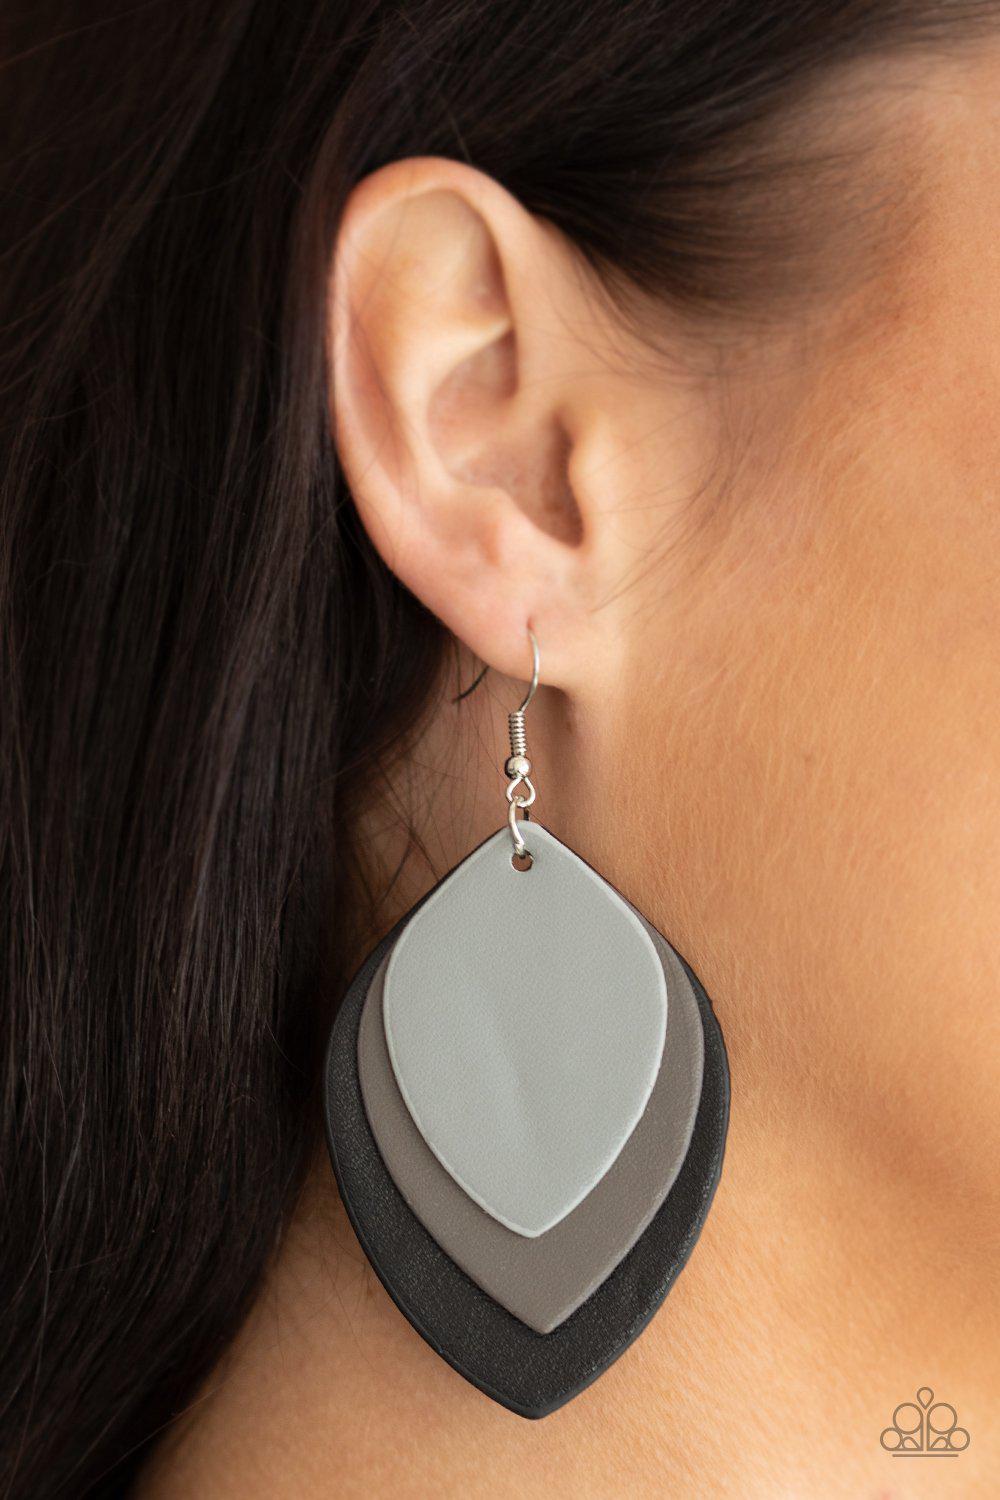 Light as a LEATHER Black Leather Earrings - Paparazzi Accessories - model -CarasShop.com - $5 Jewelry by Cara Jewels